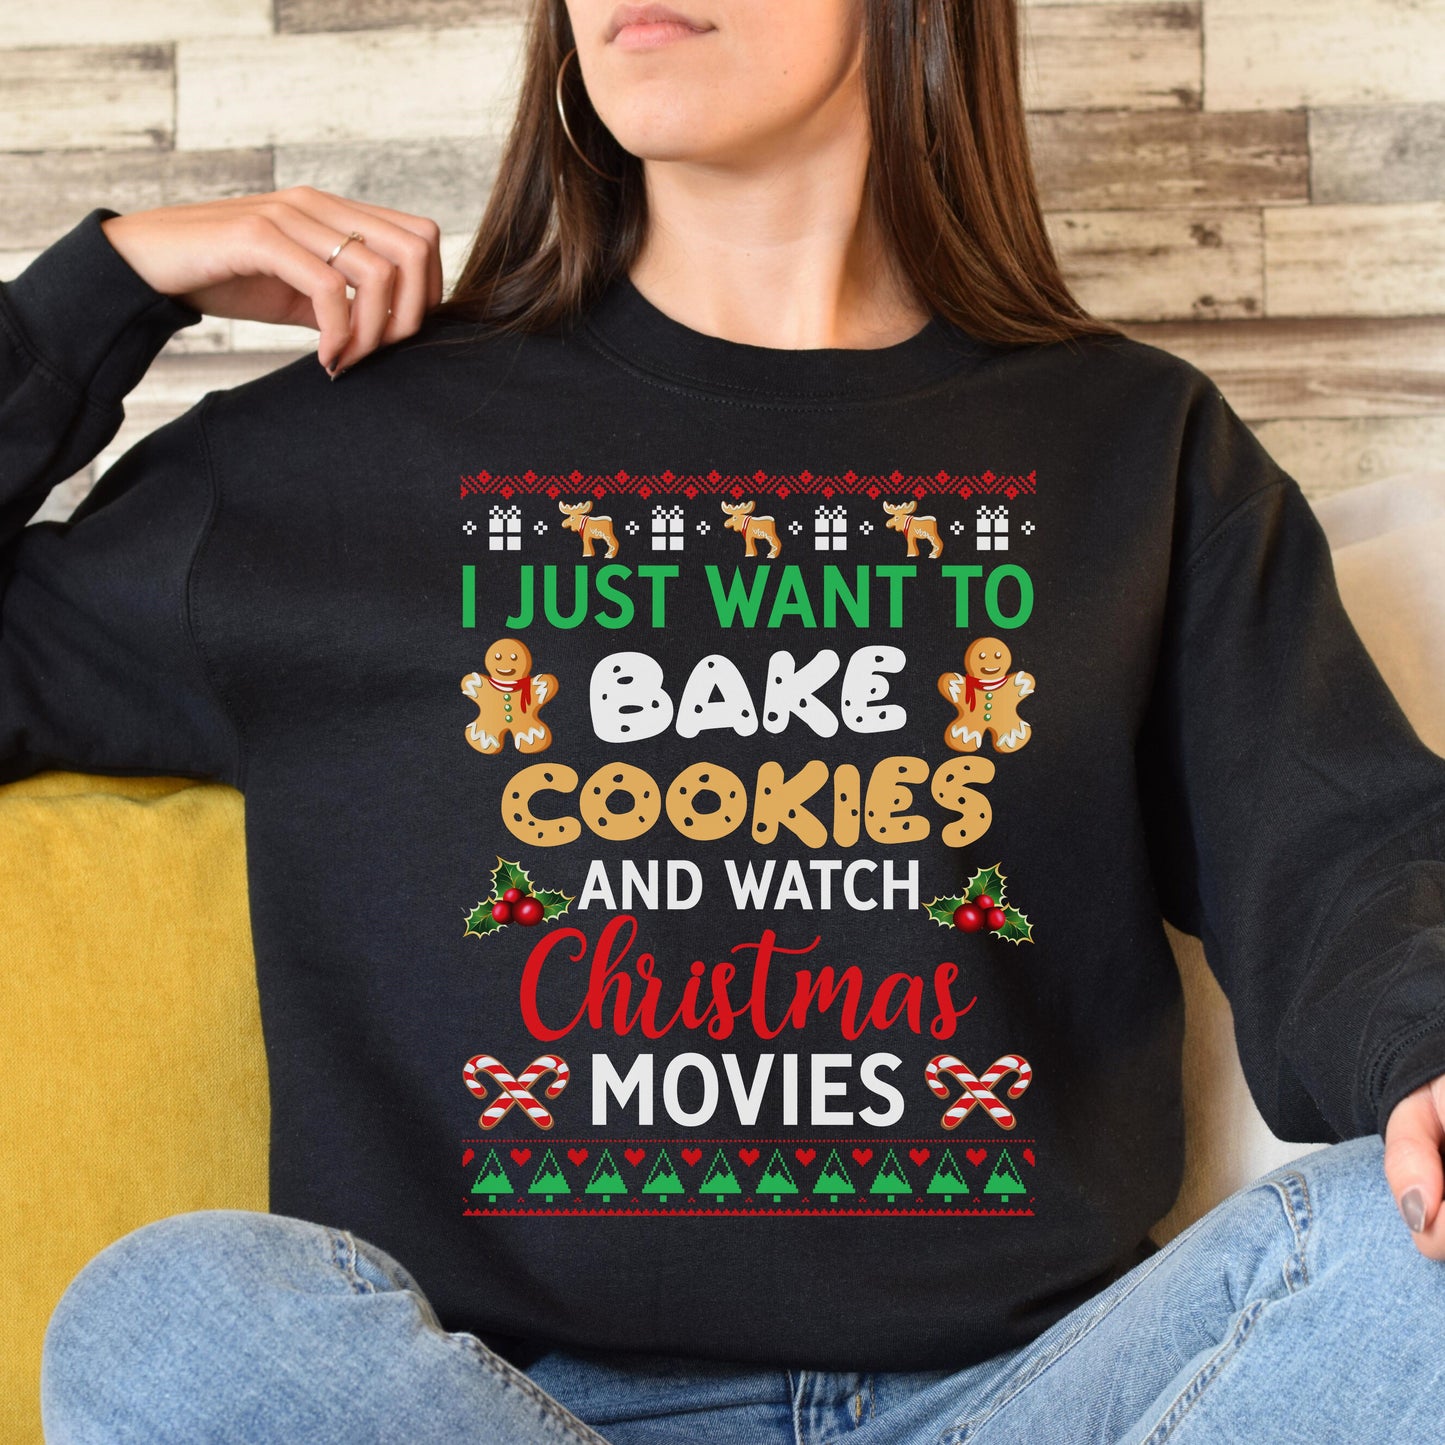 Cookies and movies Christmas Unisex Sweatshirt Ugly sweater Black Dark Heather-Black-Family-Gift-Planet